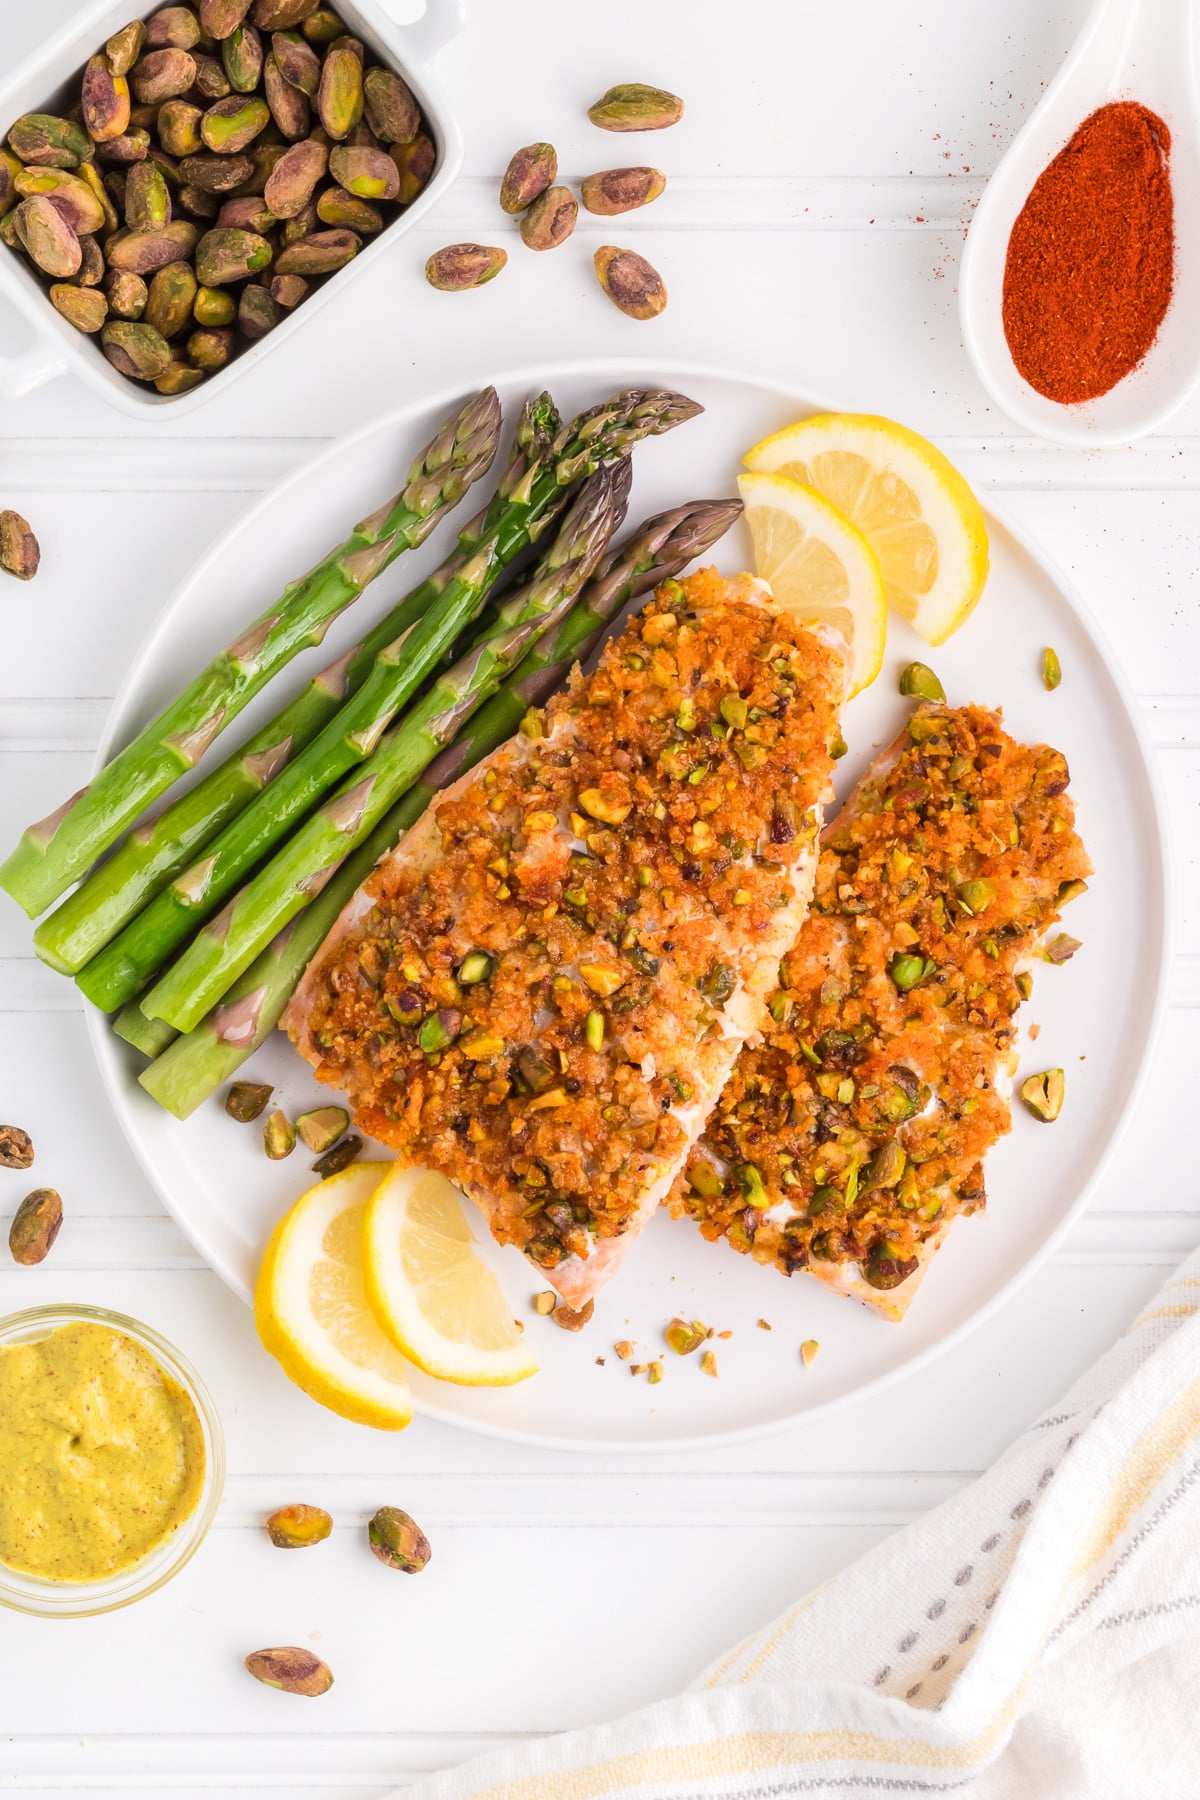 A plate with pistachio crusted salmon filets, asparagus, and lemon slices on a table.